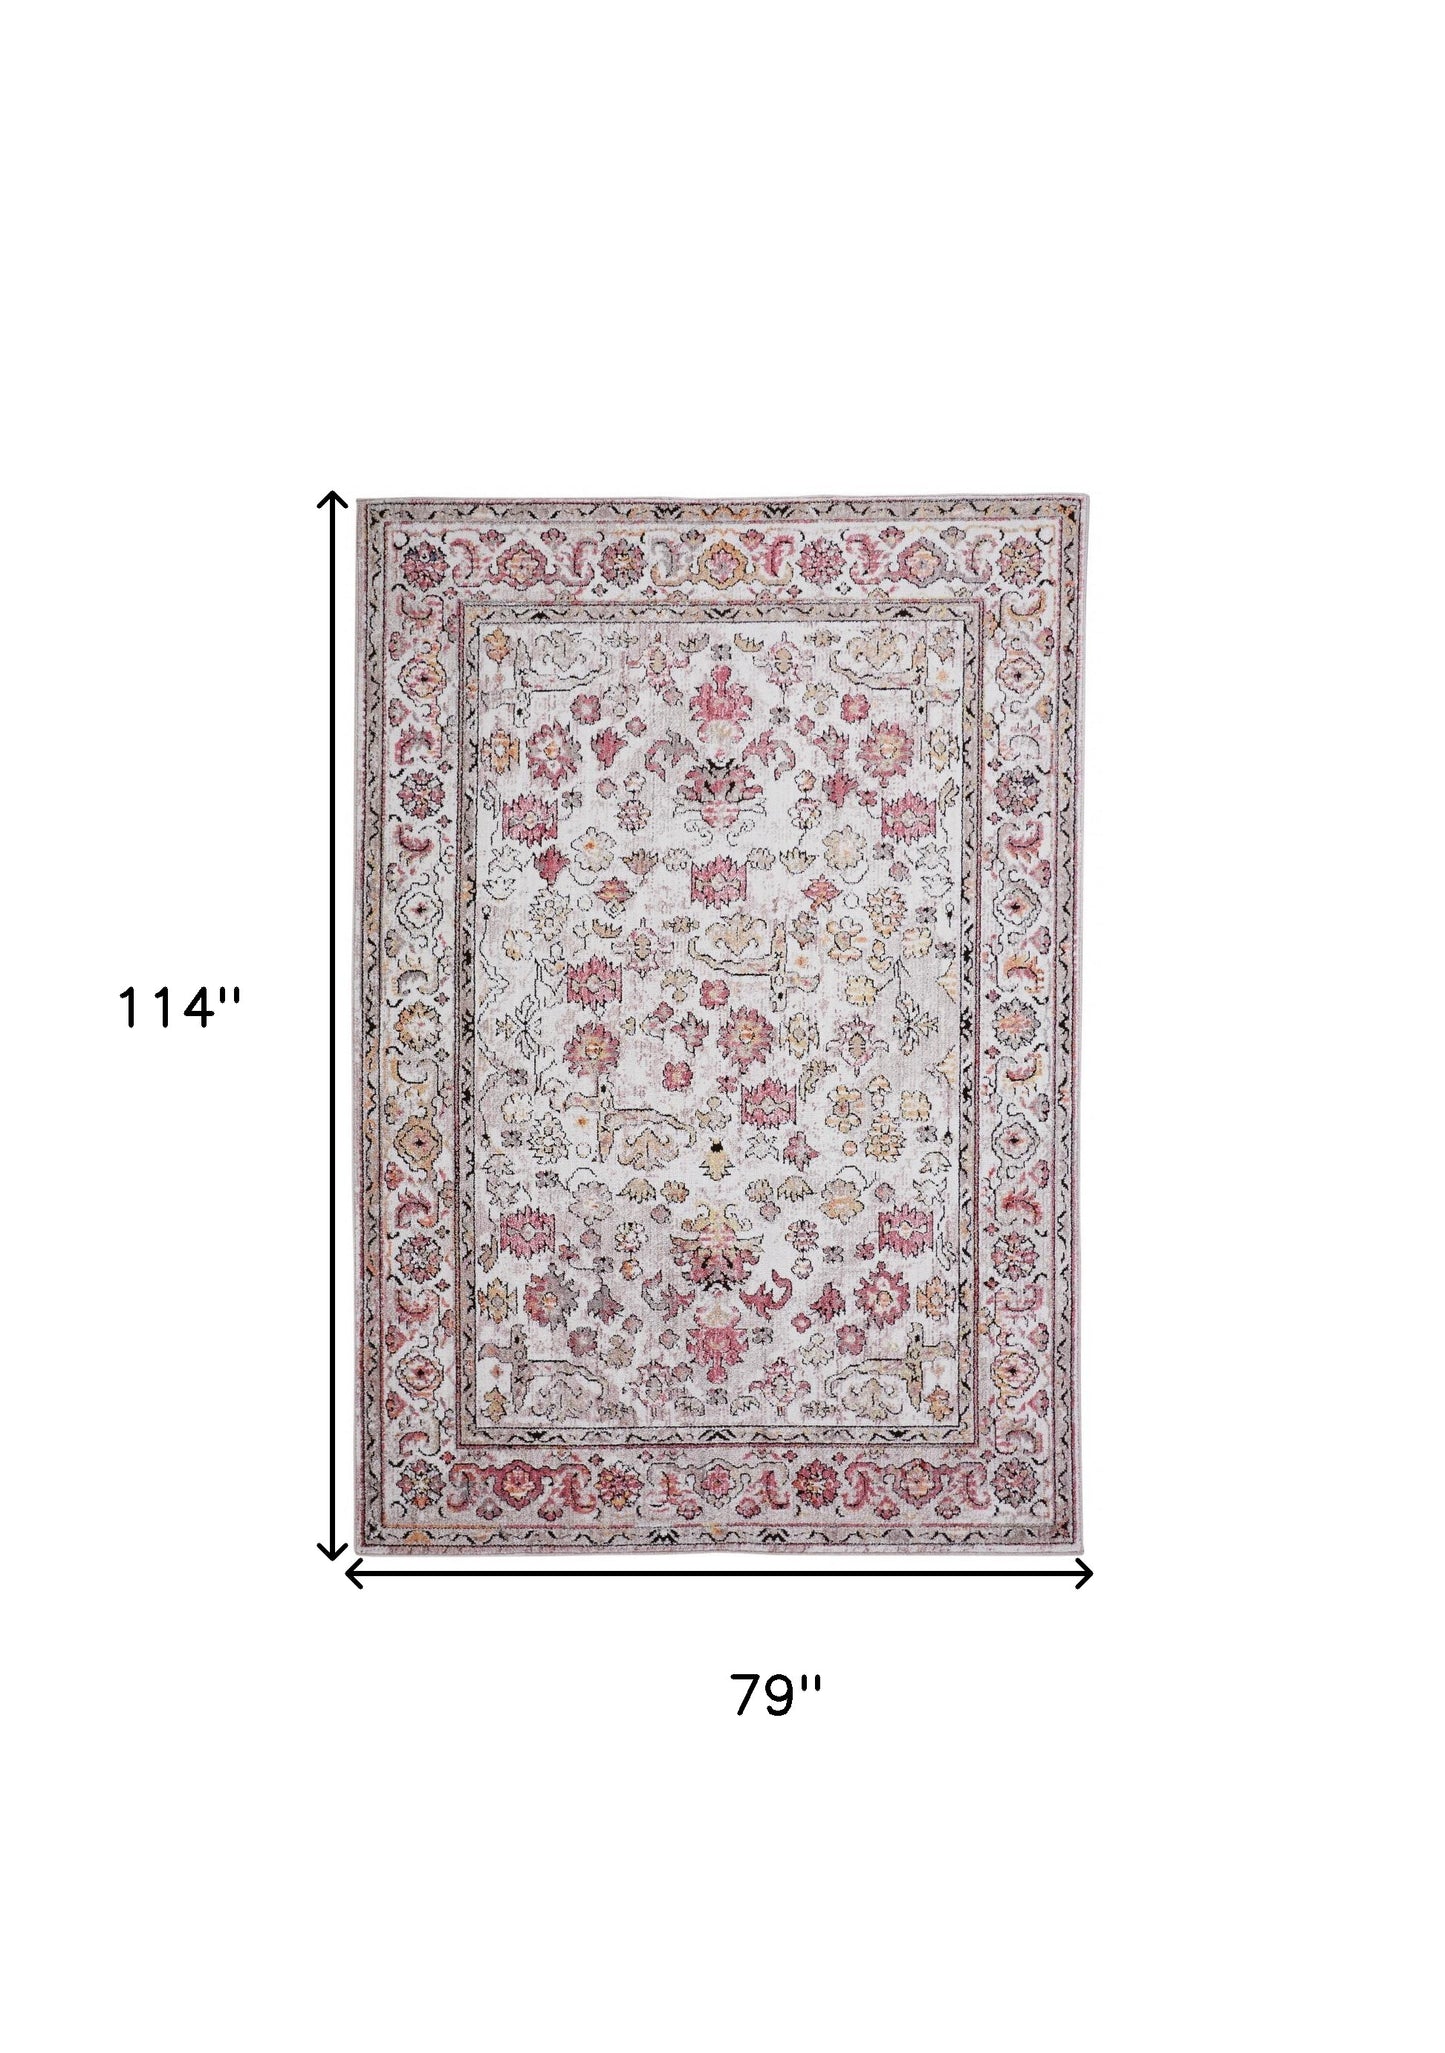 10' x 13' Pink and Ivory Floral Area Rug